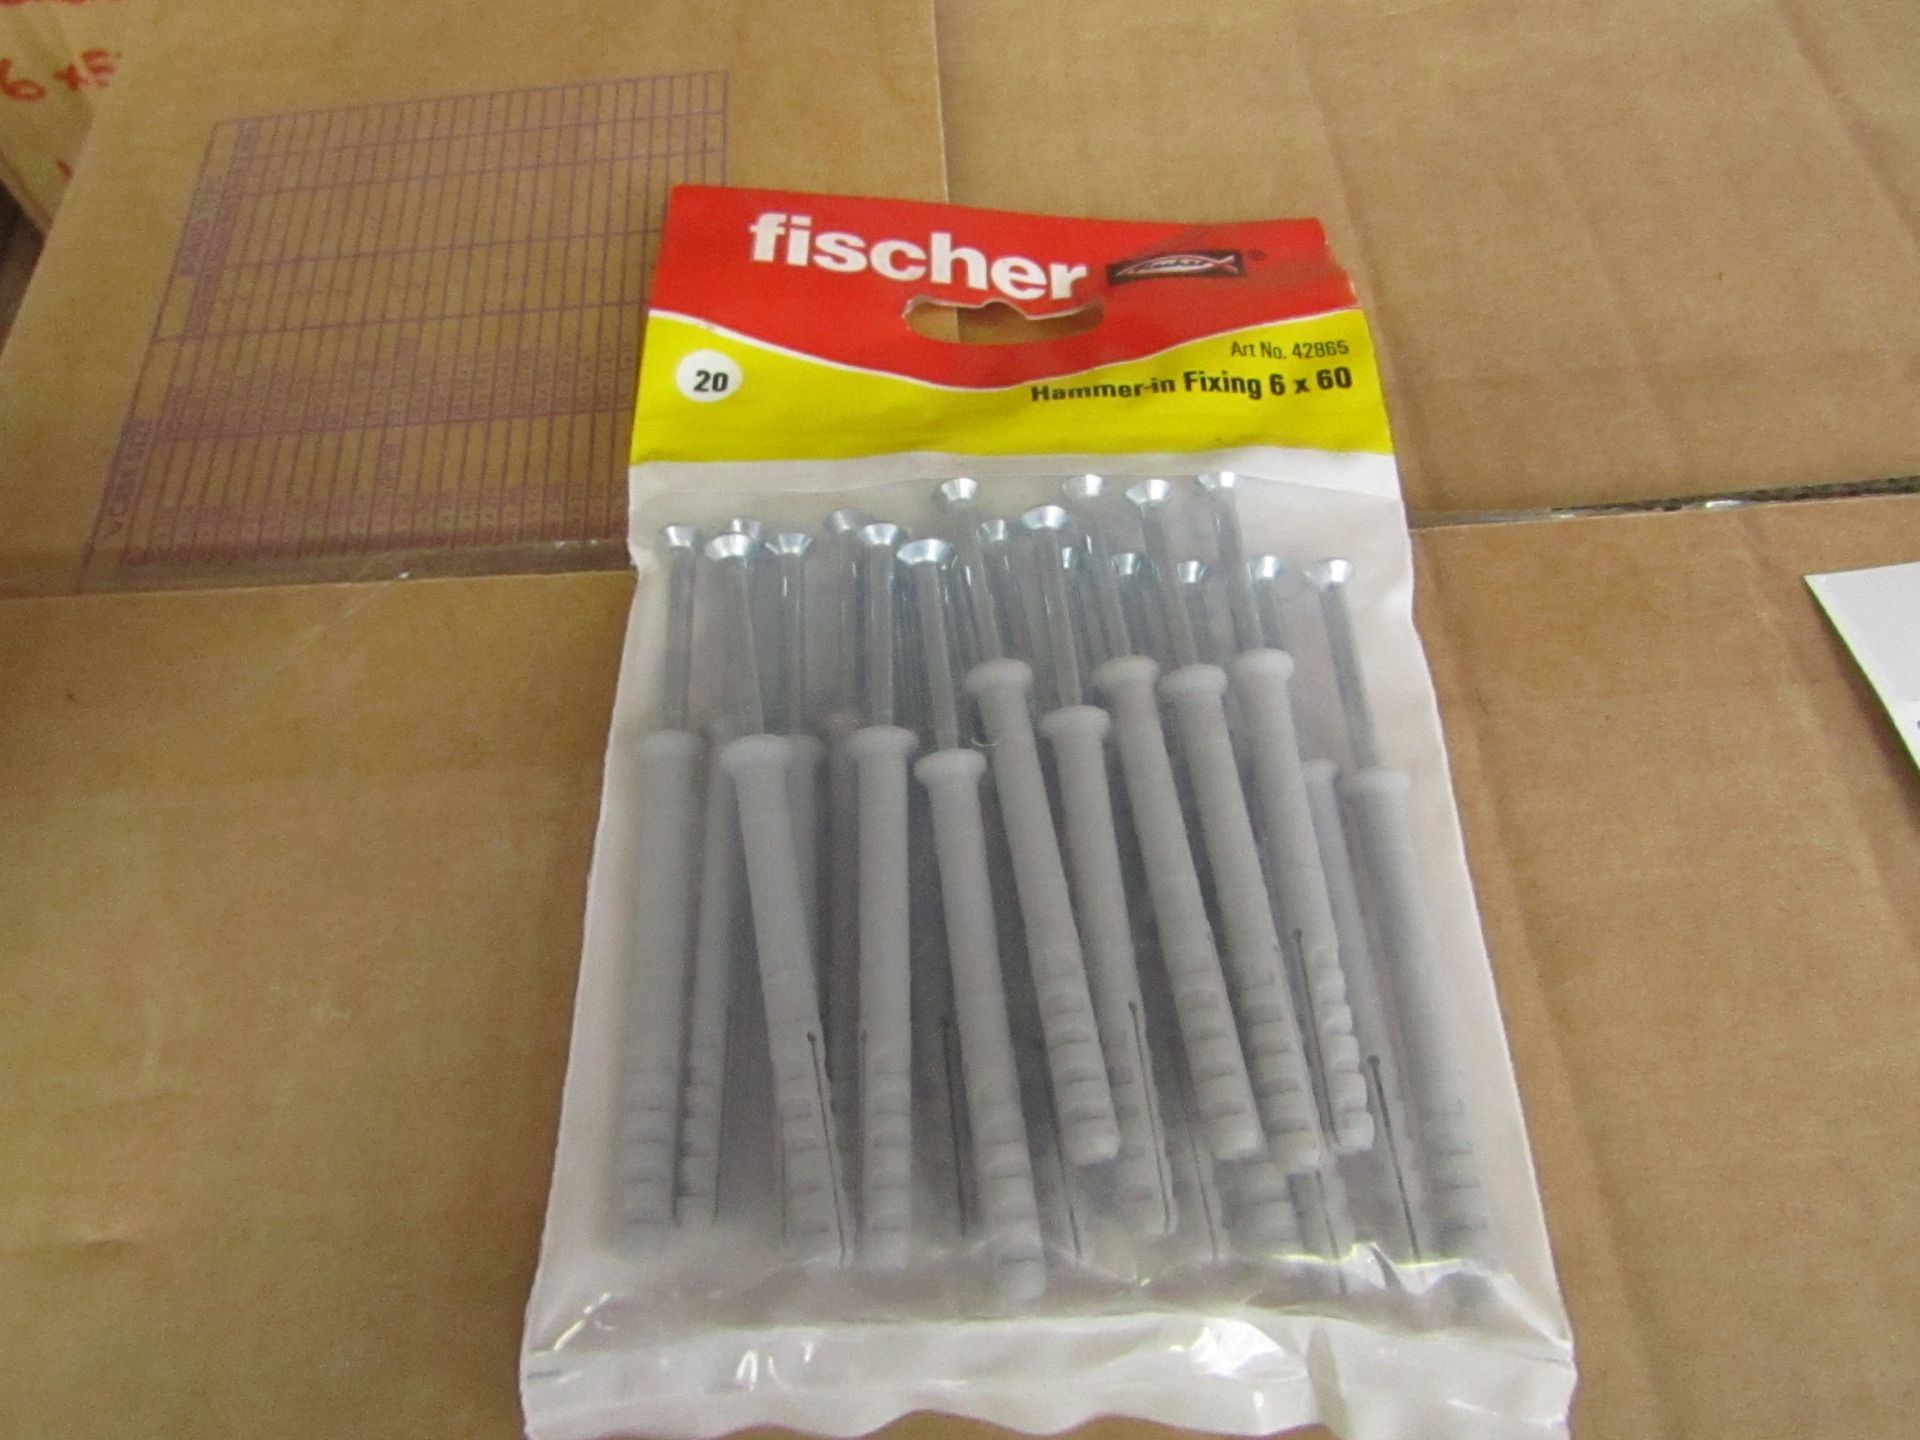 5x Fischer - Hammer-In Fixing 6 x 60 (Packs of 20) - New & Packaged.